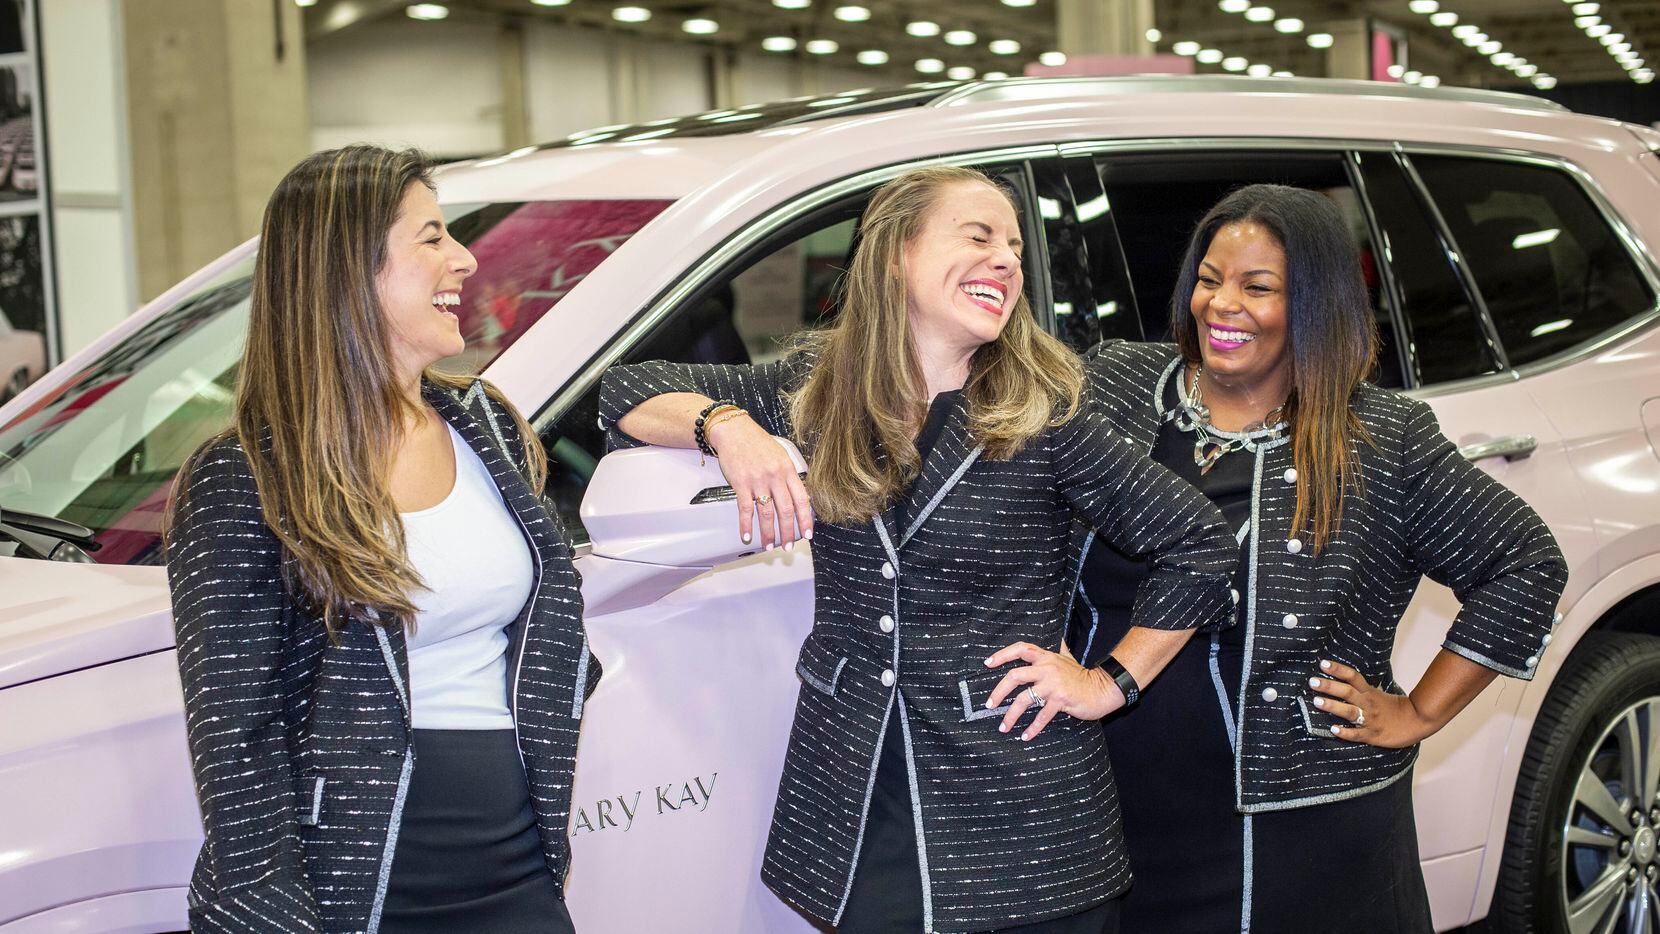 At the seminars, Mary Kay will have a few of its iconic vehicles available for photo...